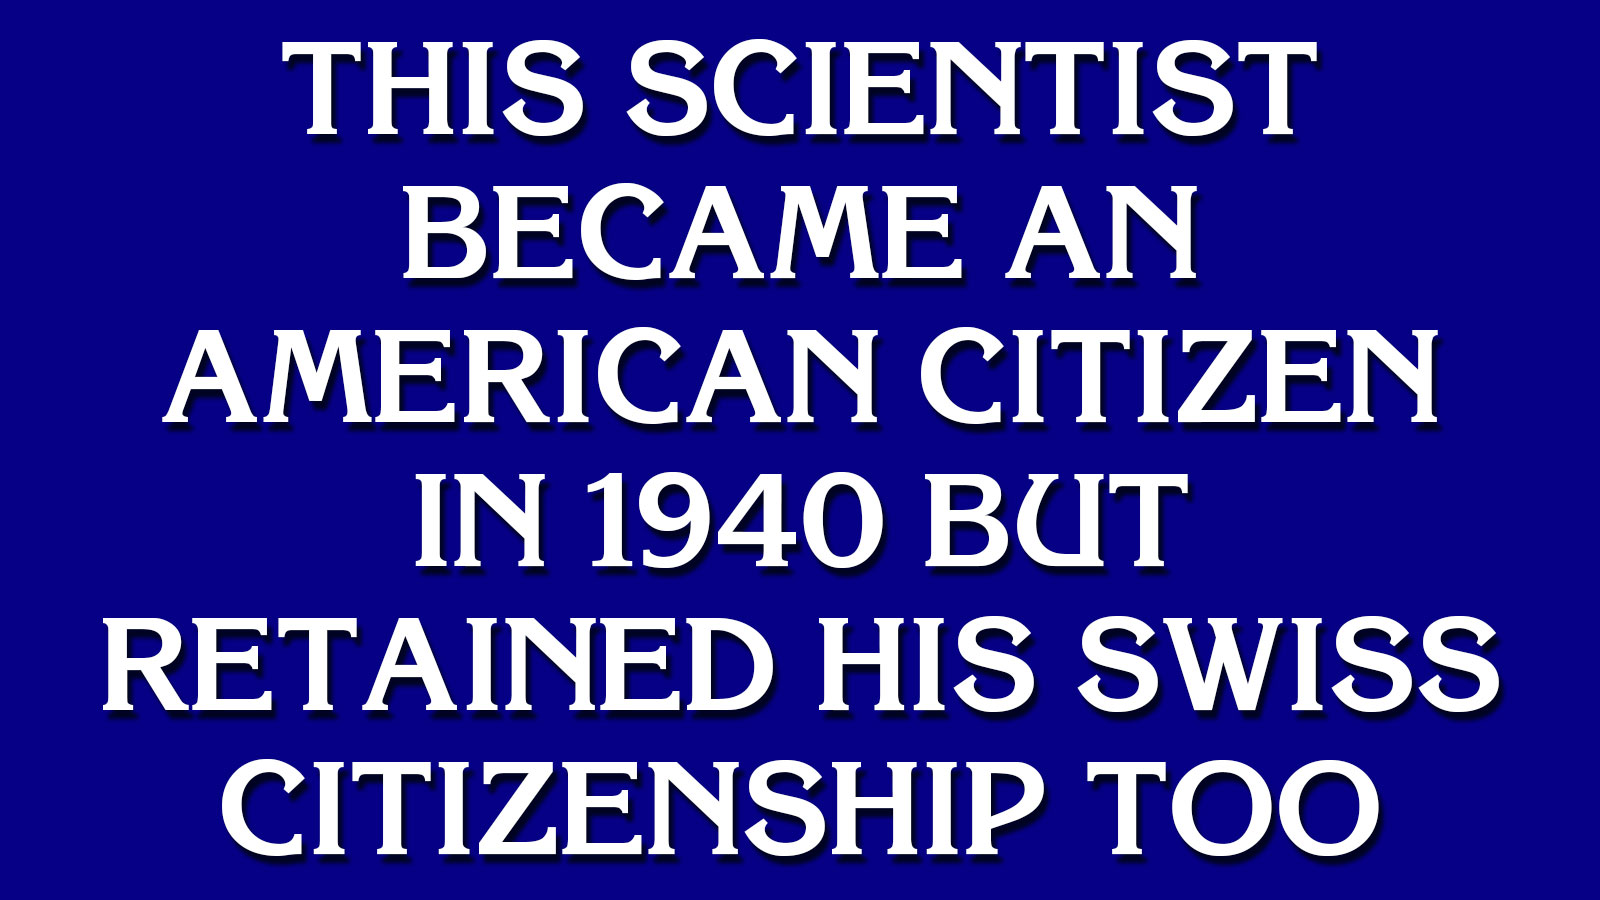 Can You Go on “Jeopardy!”? 92